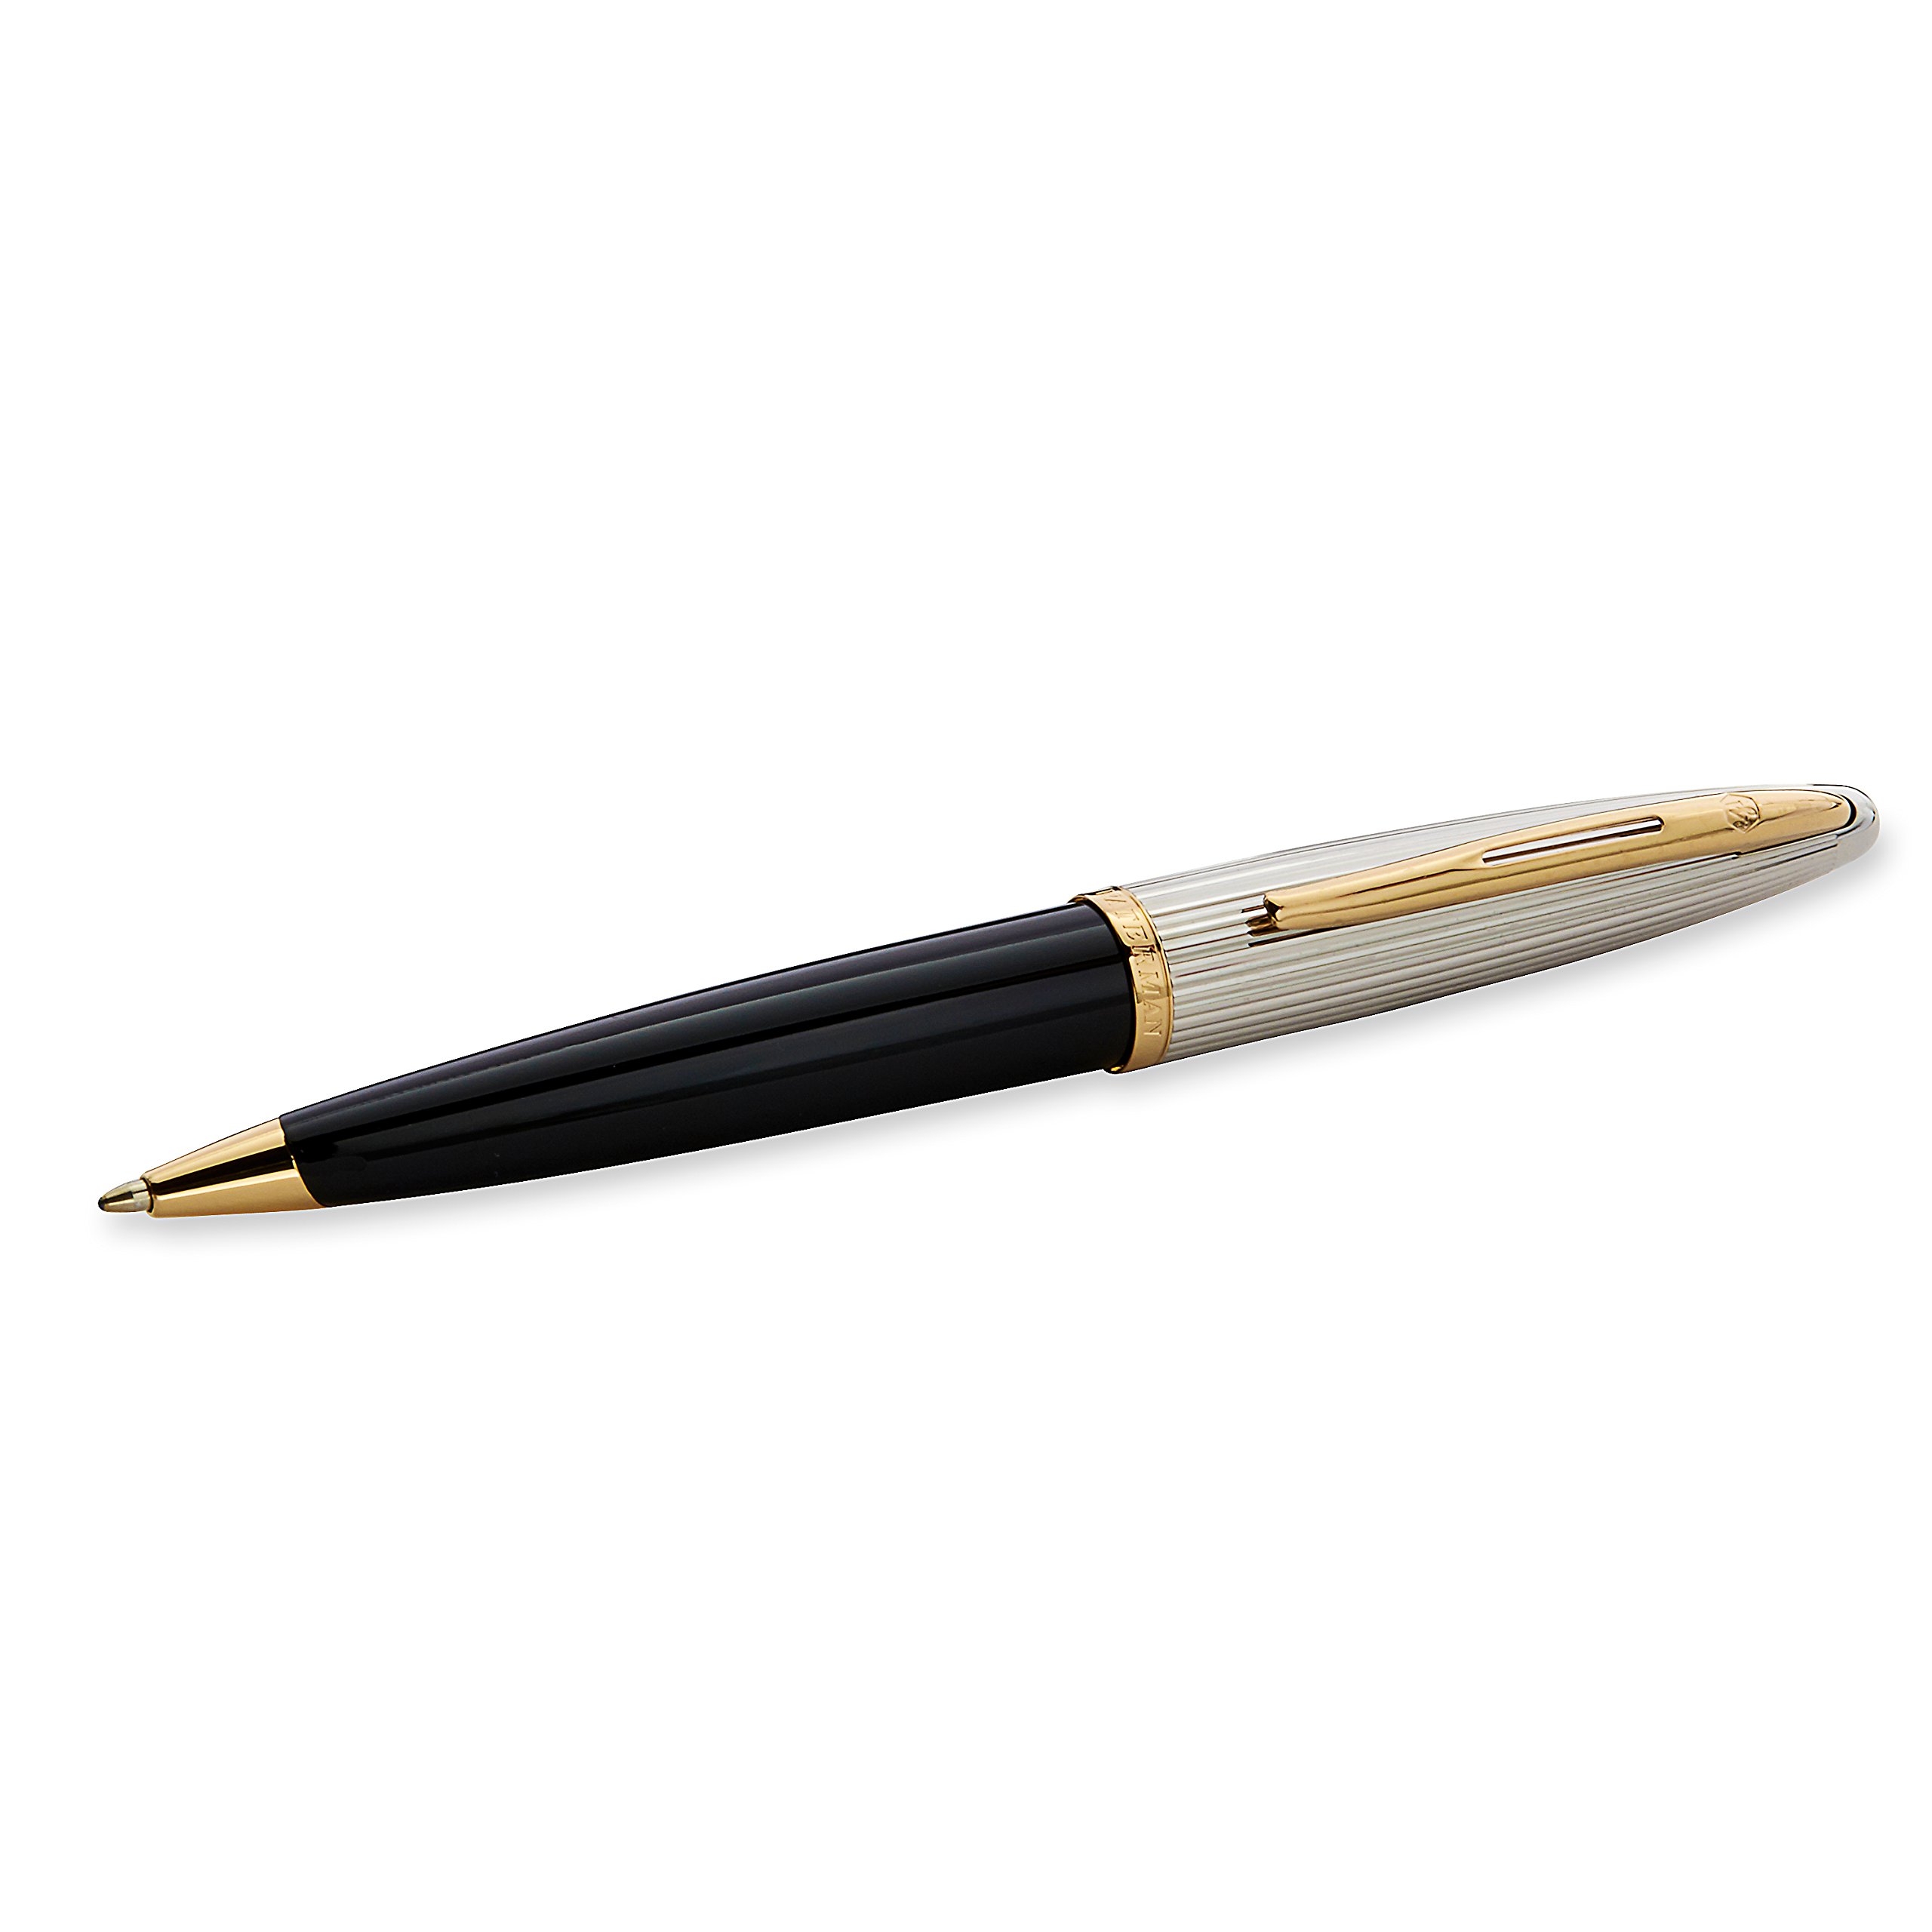 Waterman Carene Deluxe Ballpoint Pen - 23k Gold Clip - Medium Point with Blue Ink